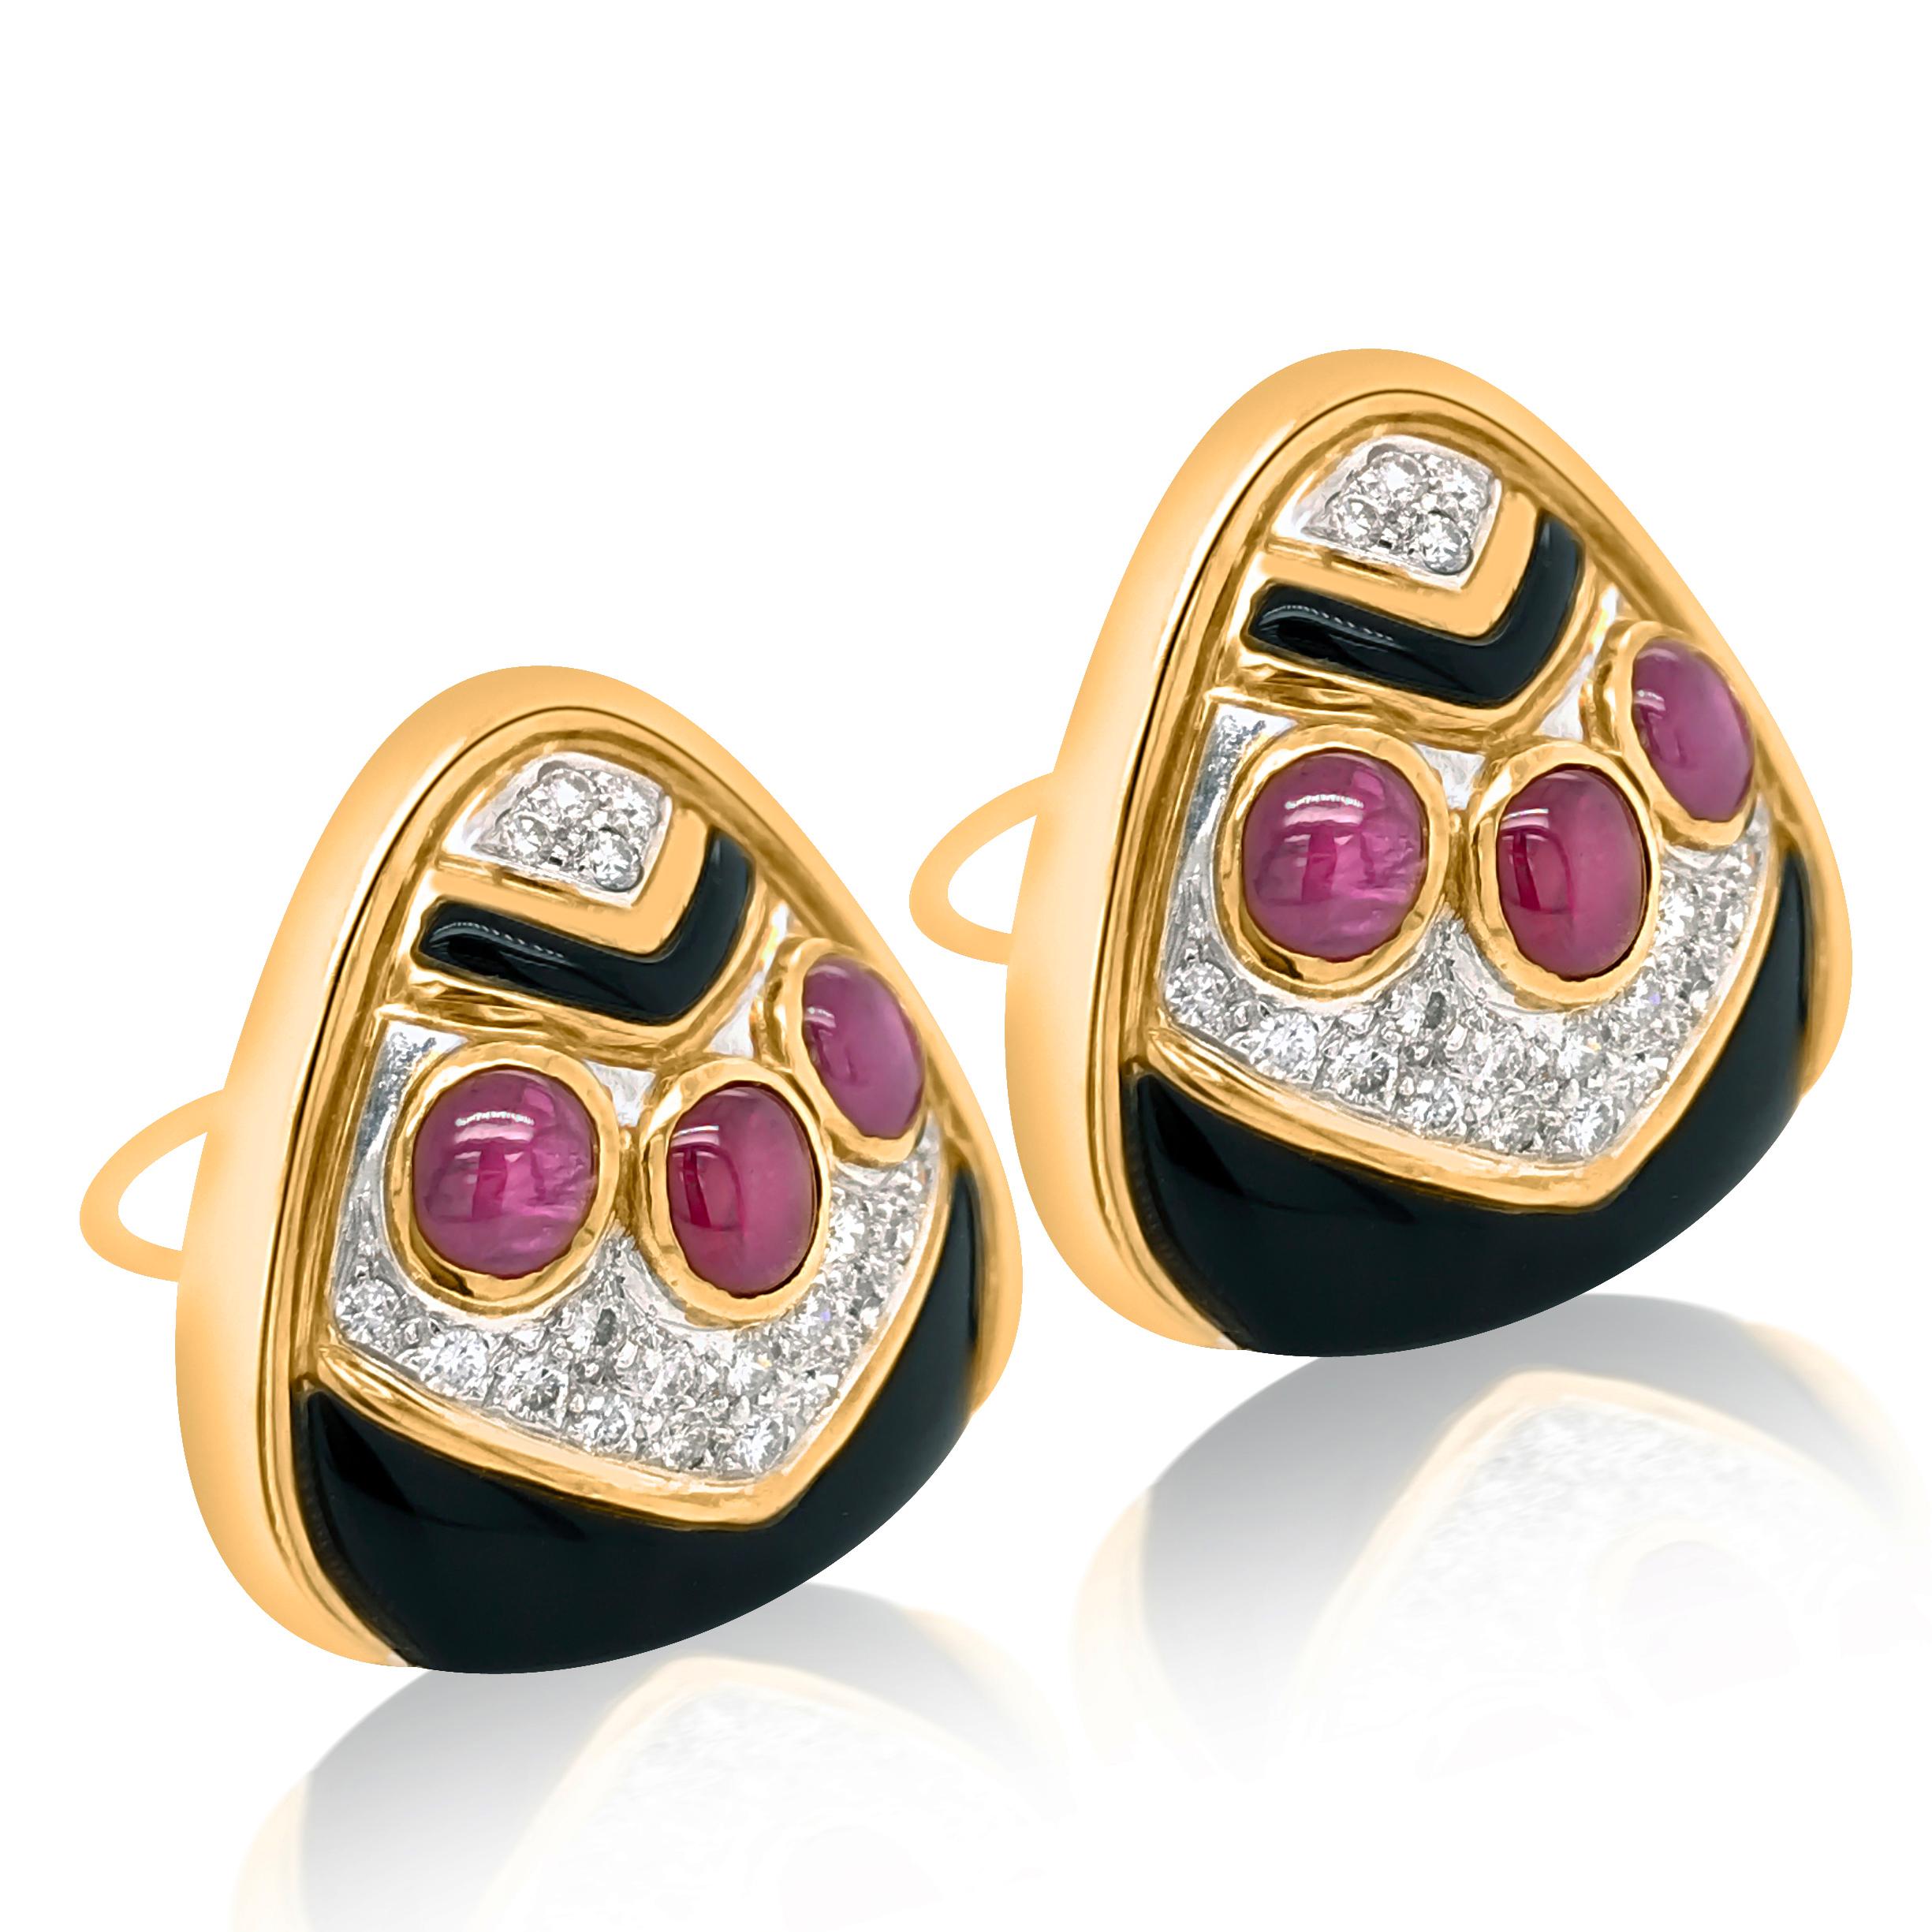 This pair of glamorous earrings is crafted in solid 18K yellow gold, with two white gold fan-shaped parts and black onyx. They are adorned with 6 genuine cabochon cut rubies approx. 8.35 carats and 40 round diamonds of approx. 1.00ct. The earrings